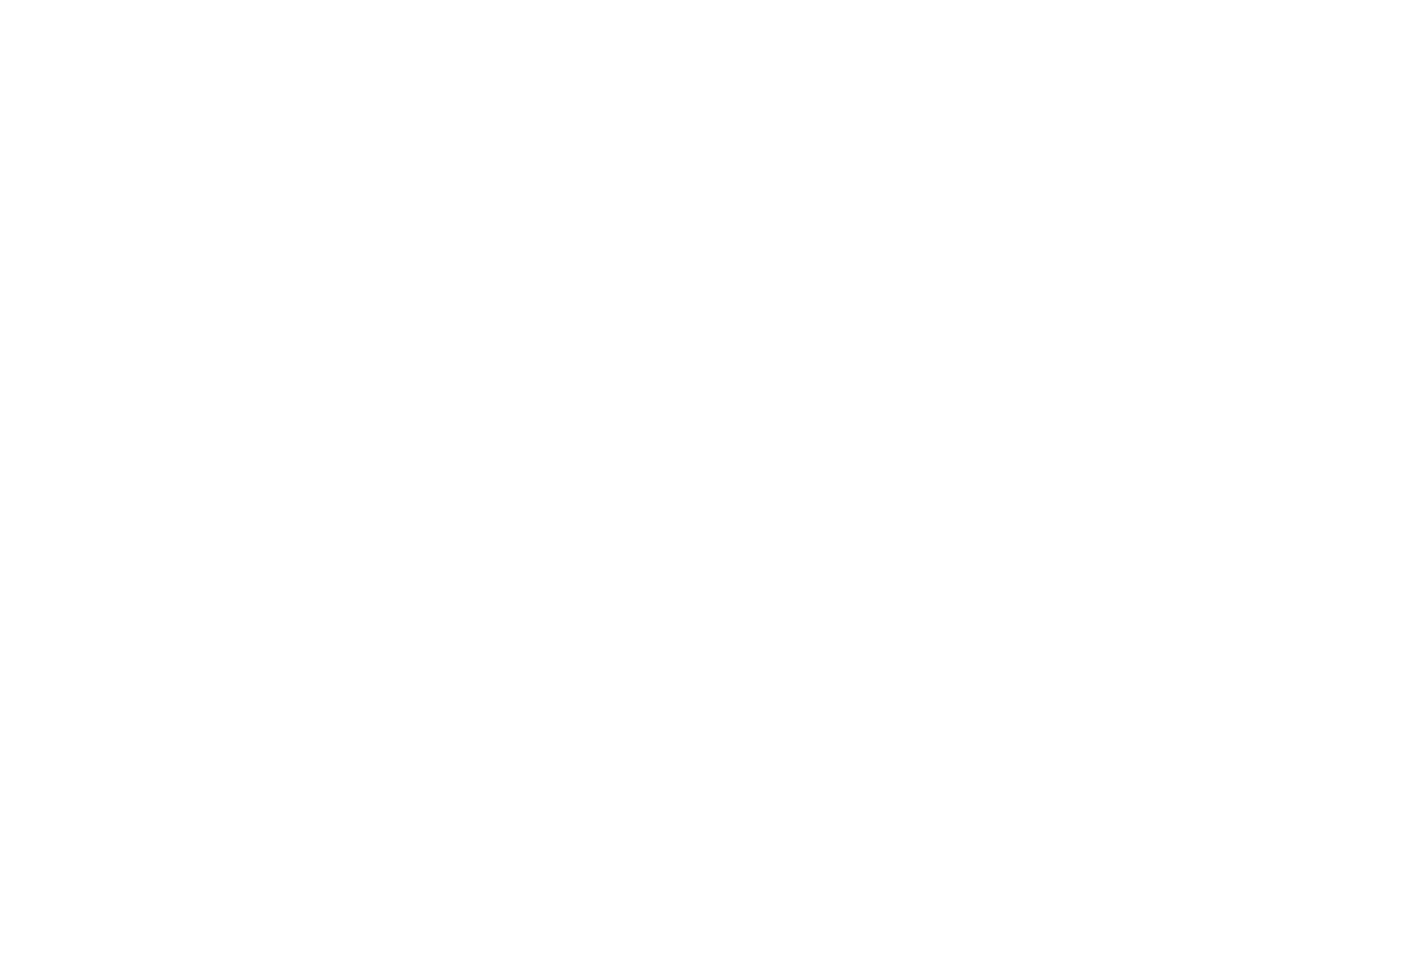 Issued by the American Tobacco Company